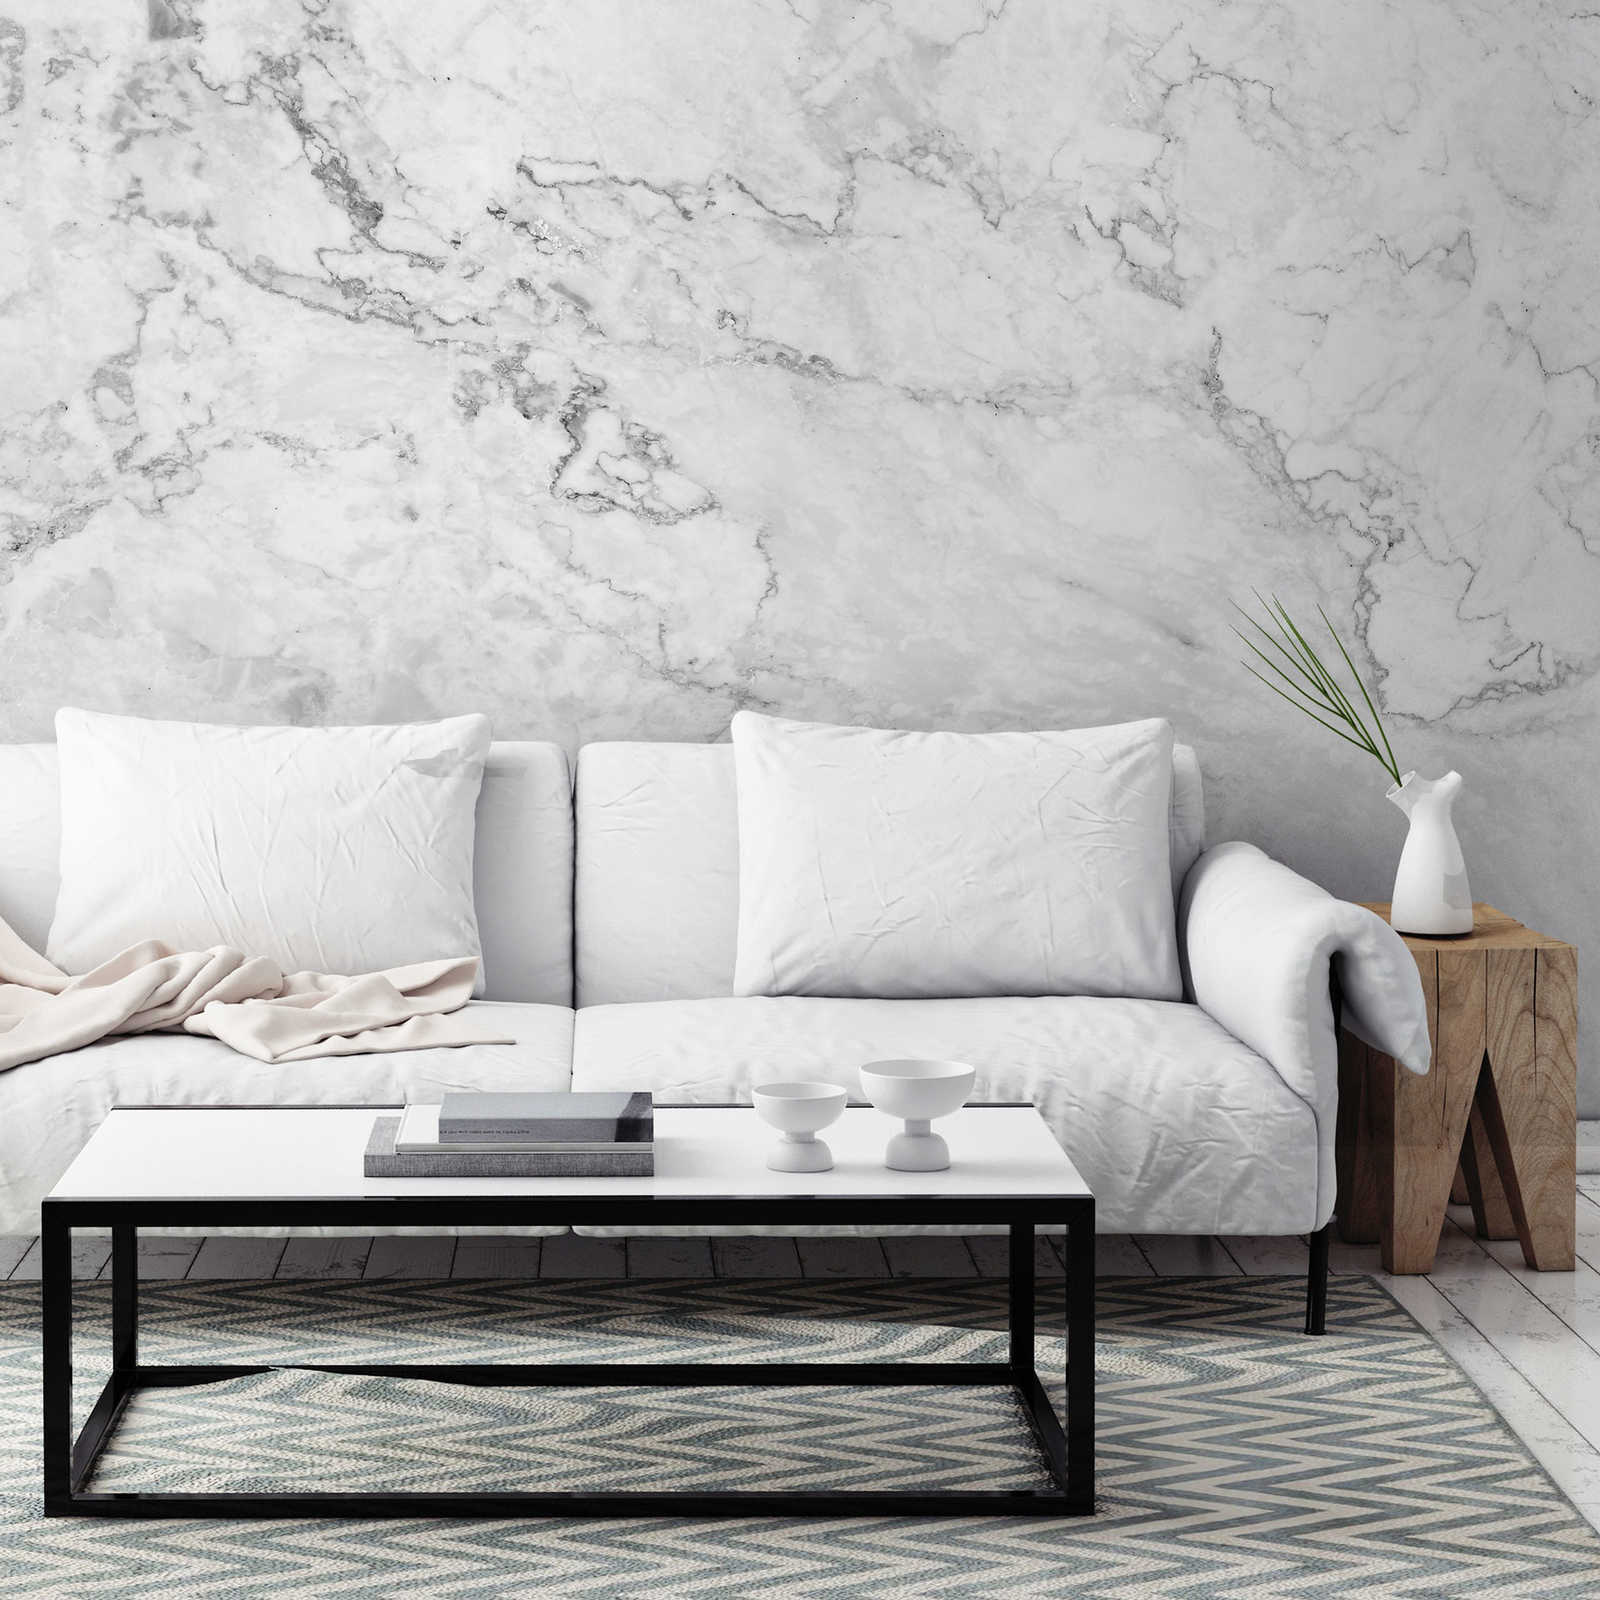             Photo wallpaper white marble with grey accents
        